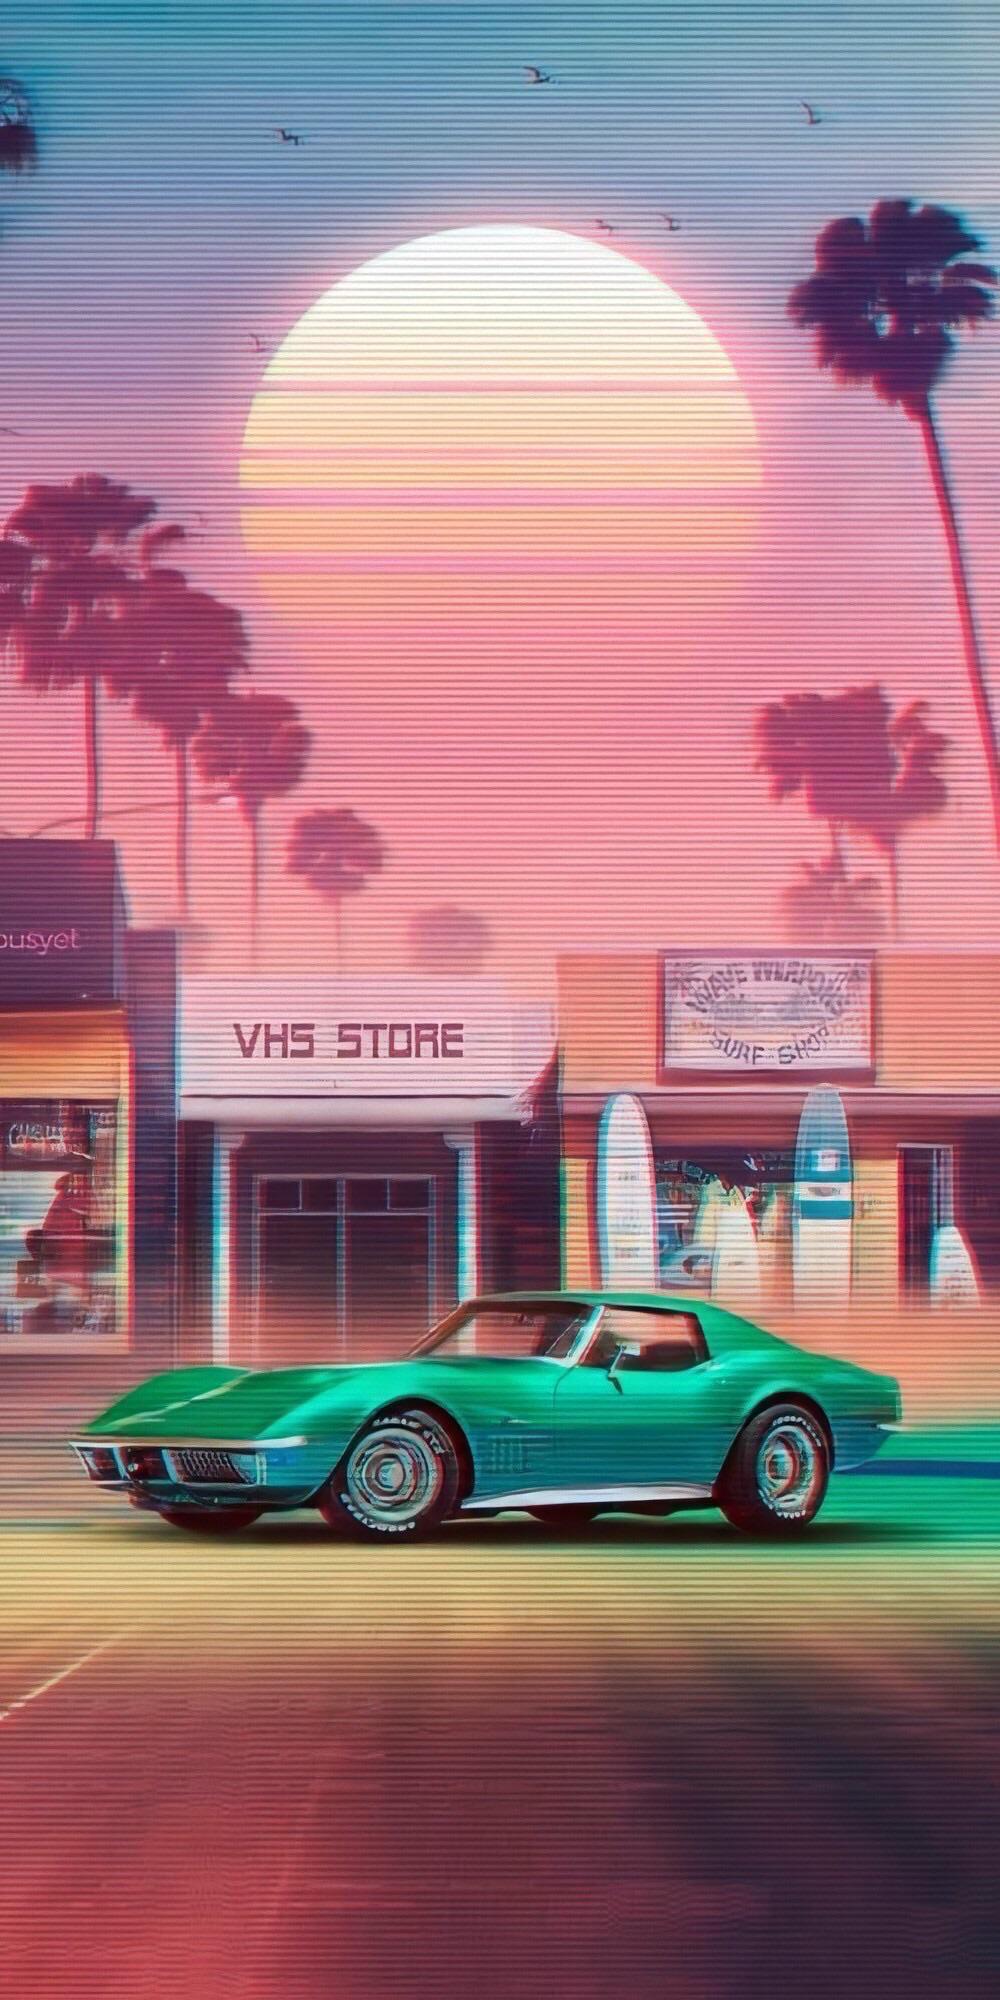 A digital painting of a green sports car in front of a store with palm trees and a sunset in the background - 80s